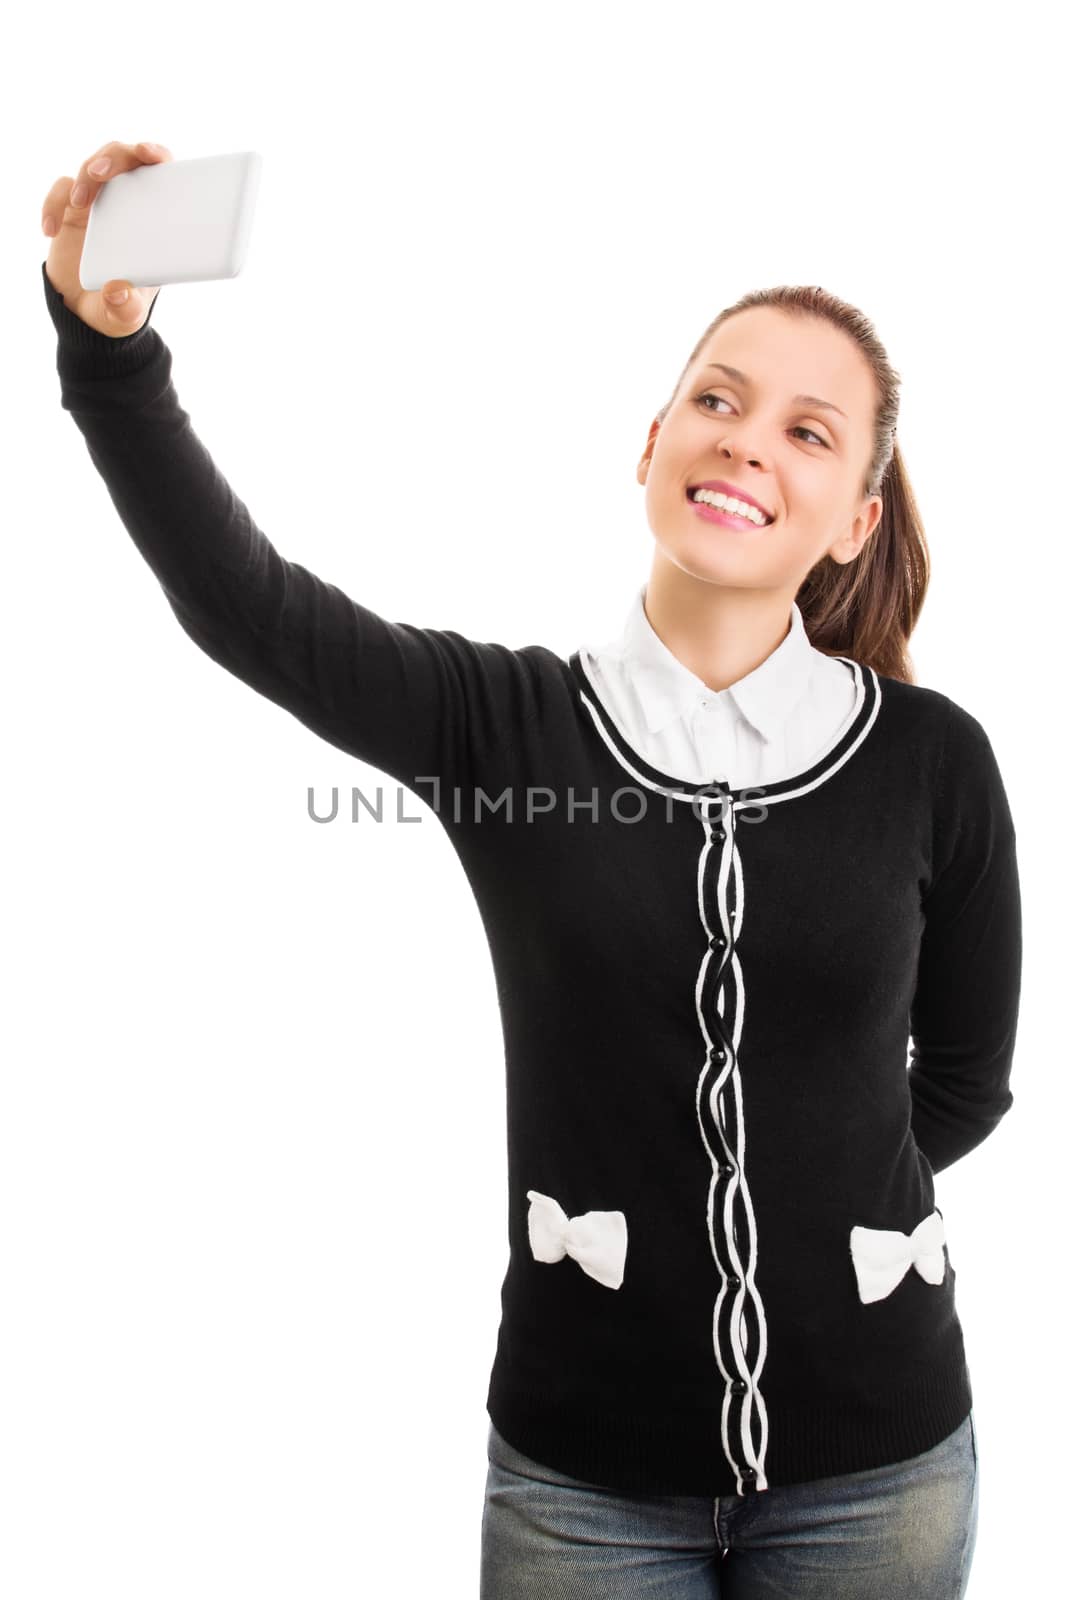 Young girl in uniform taking a selfie by Mendelex